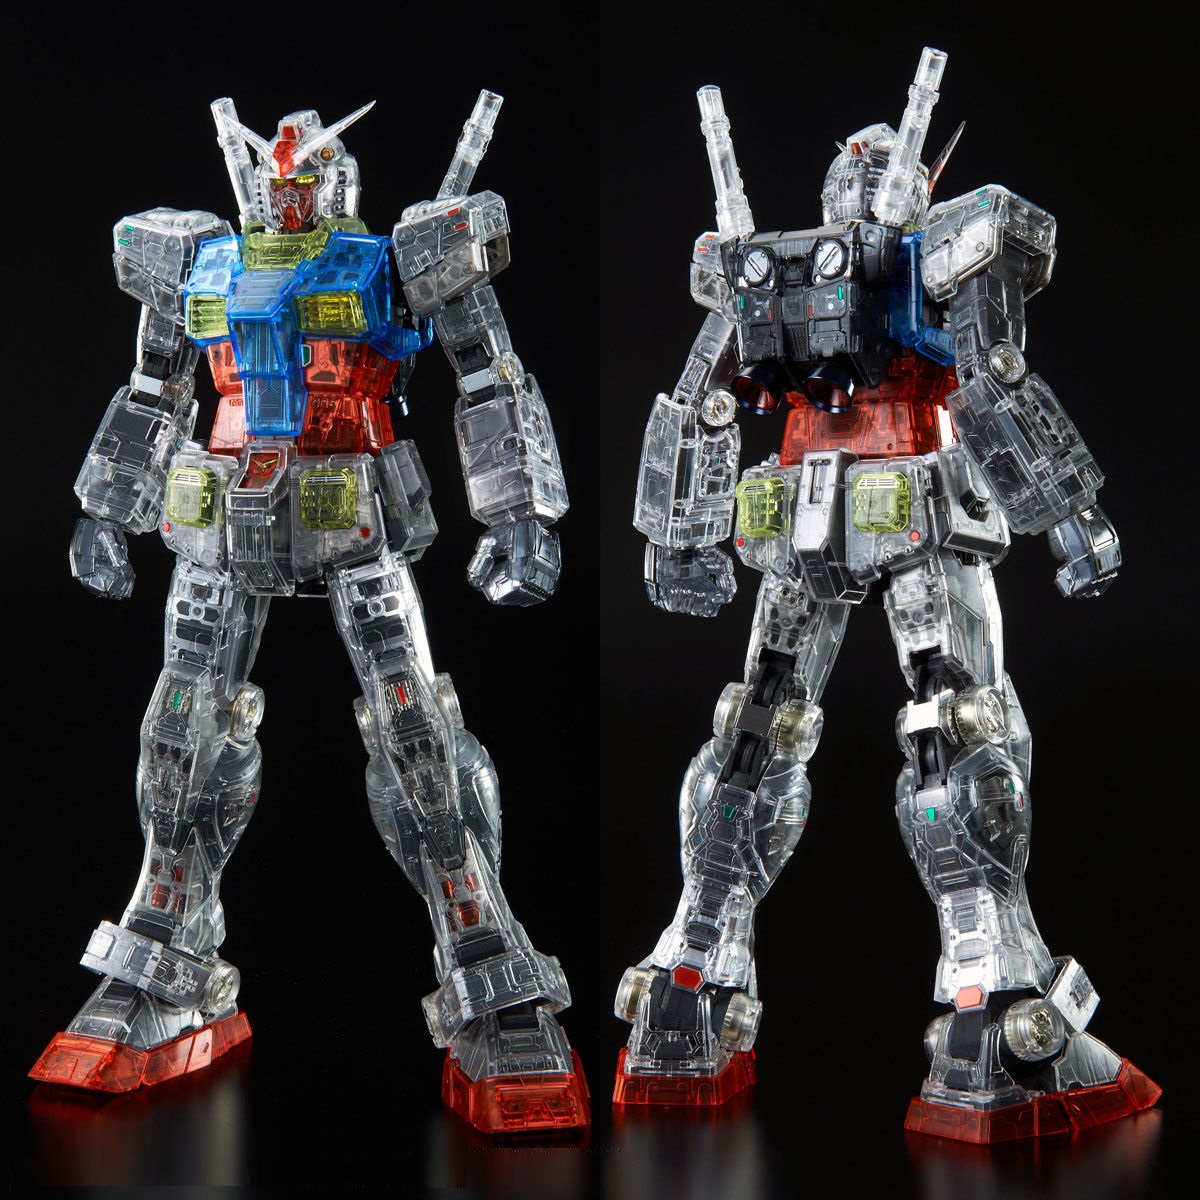 PG UNLEASHED 1/60 CLEAR COLOR BODY FOR RX-78-2 GUNDAM